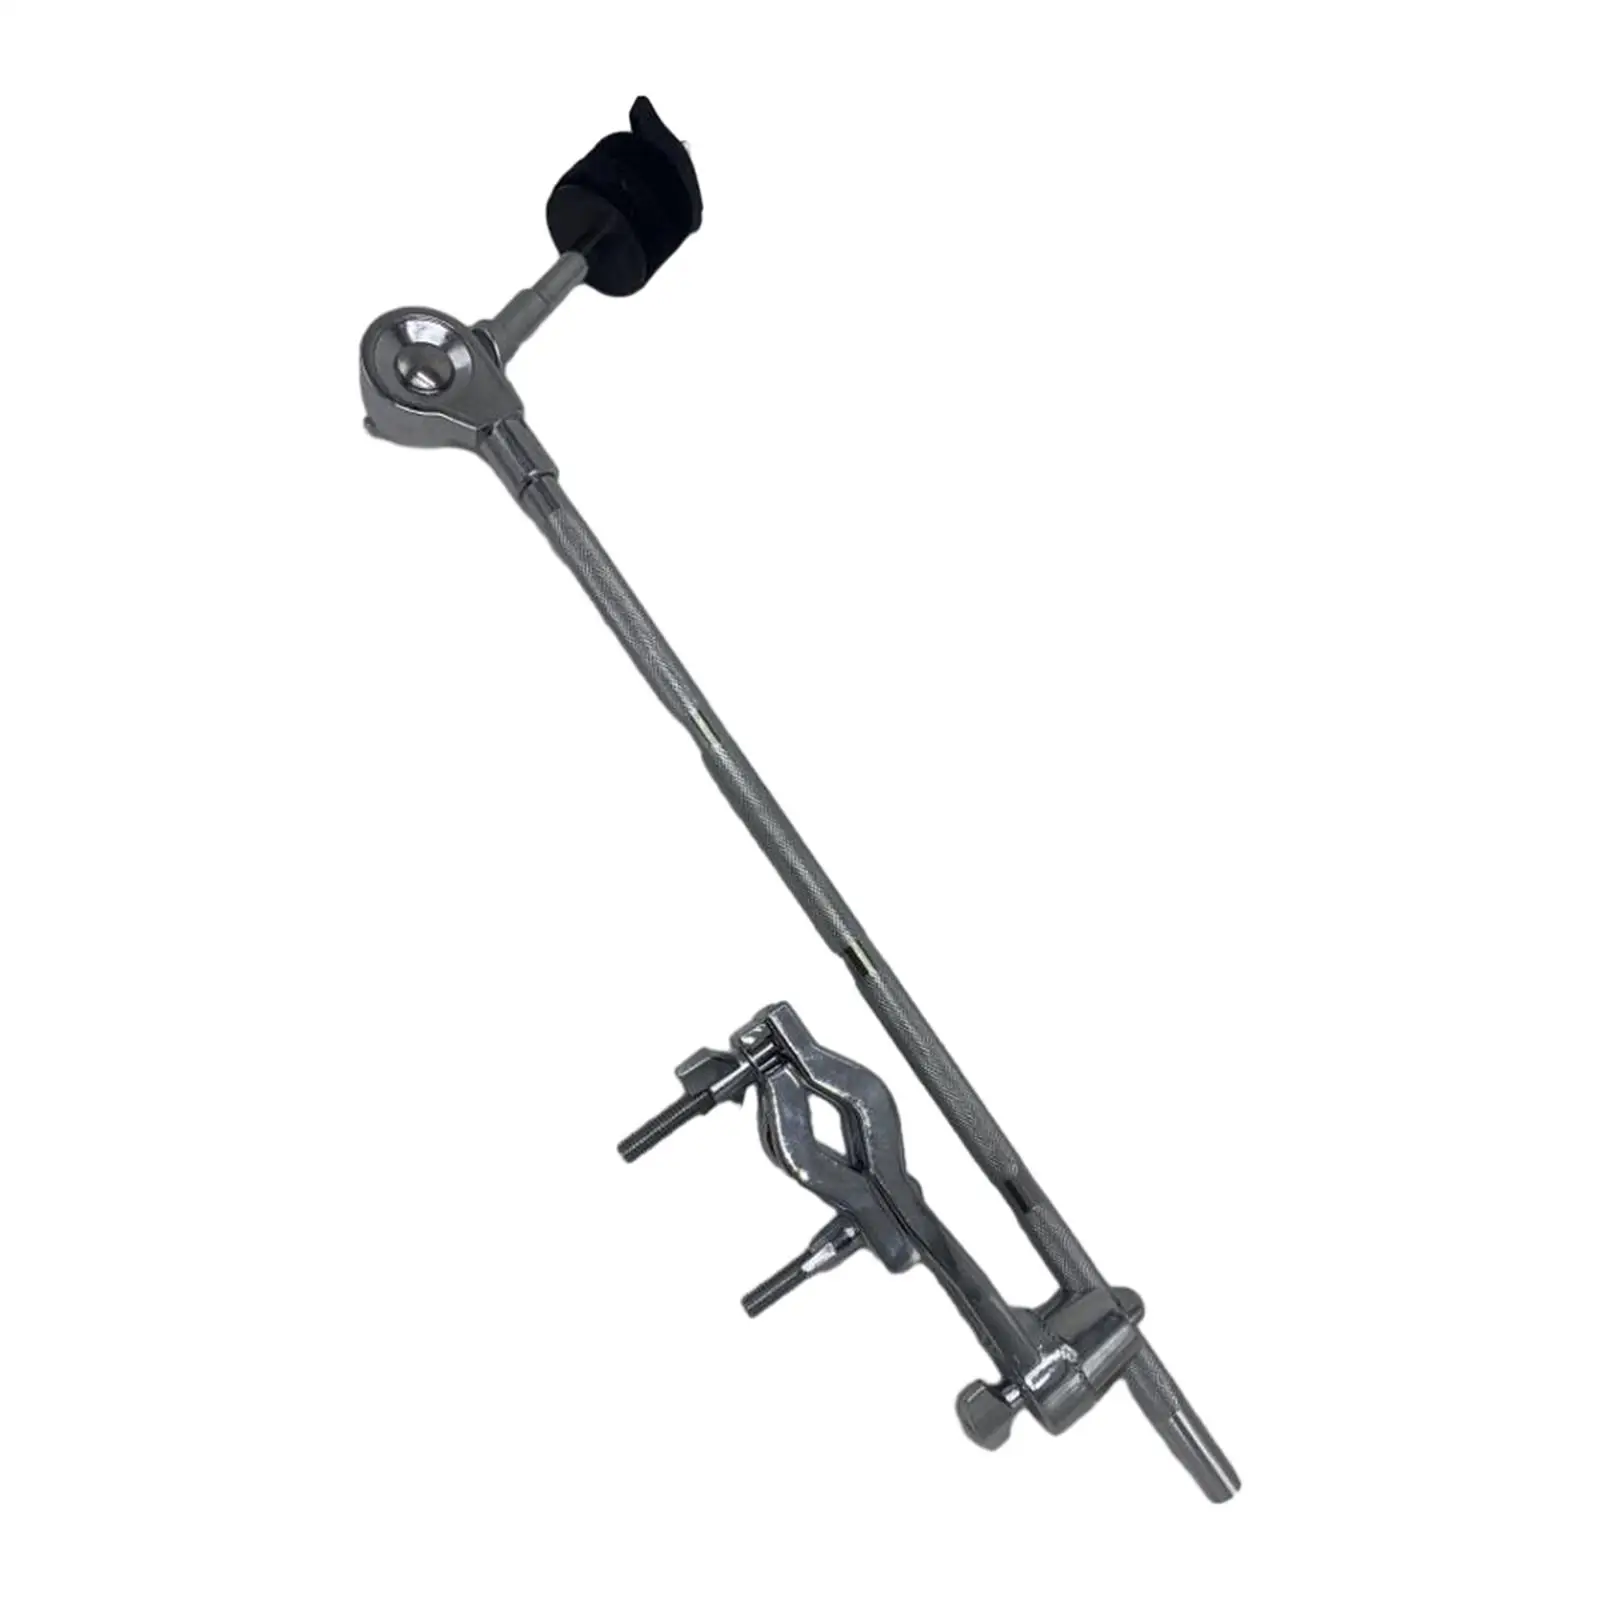 Cymbal Arm with Clamp Easily Carry Portable Support Rod Cymbal Arm Extension Arm for Musical Instrument Accessory